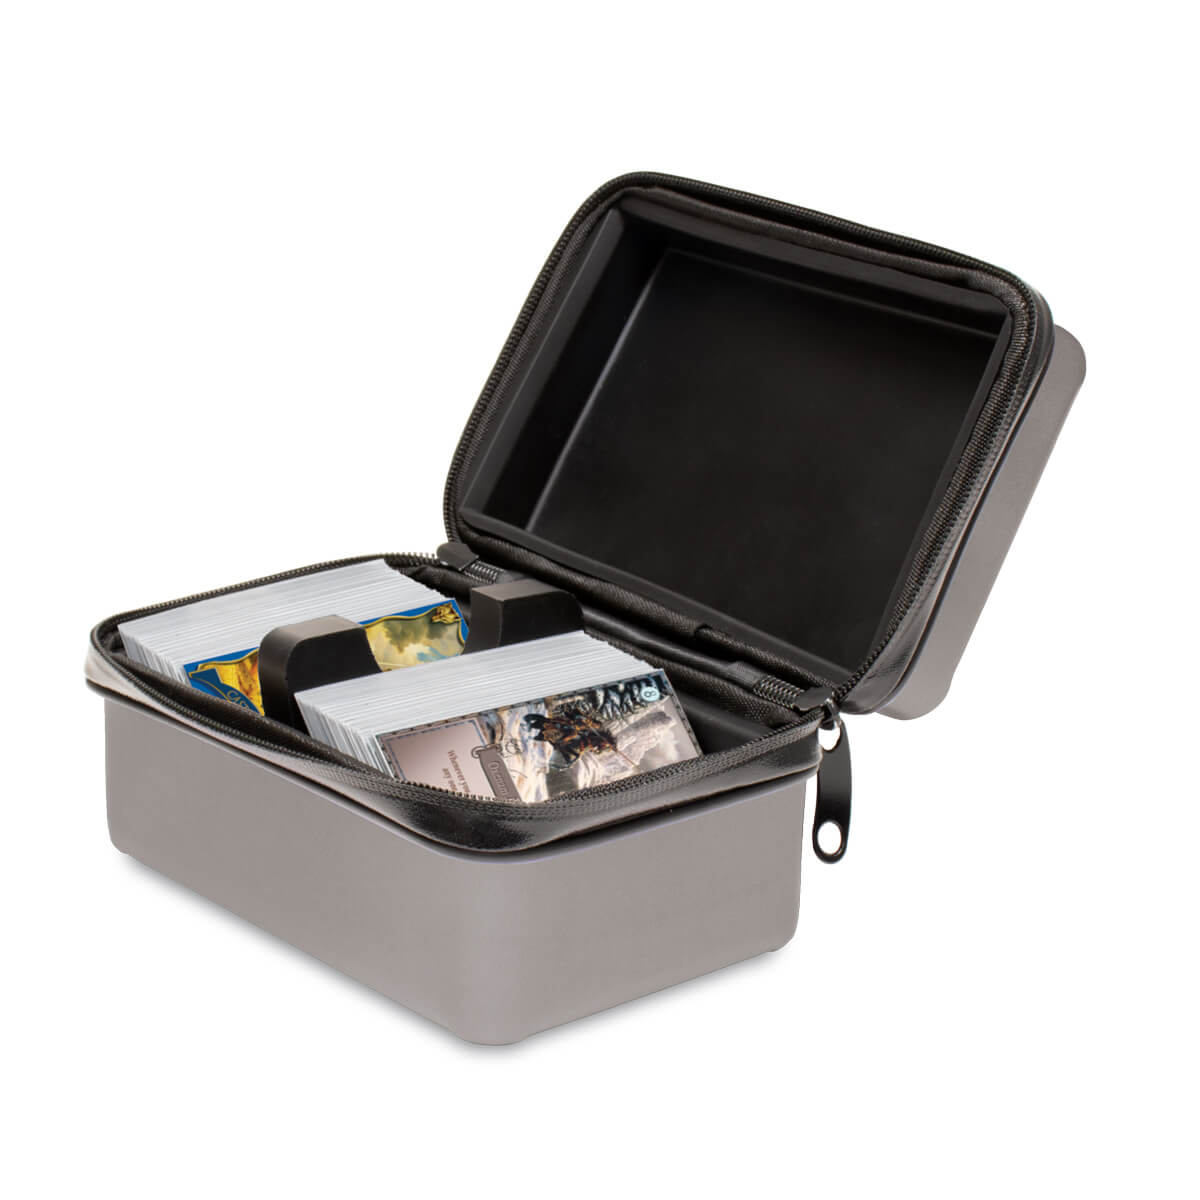 Product Image for Ultra Pro Luggage Deck Box